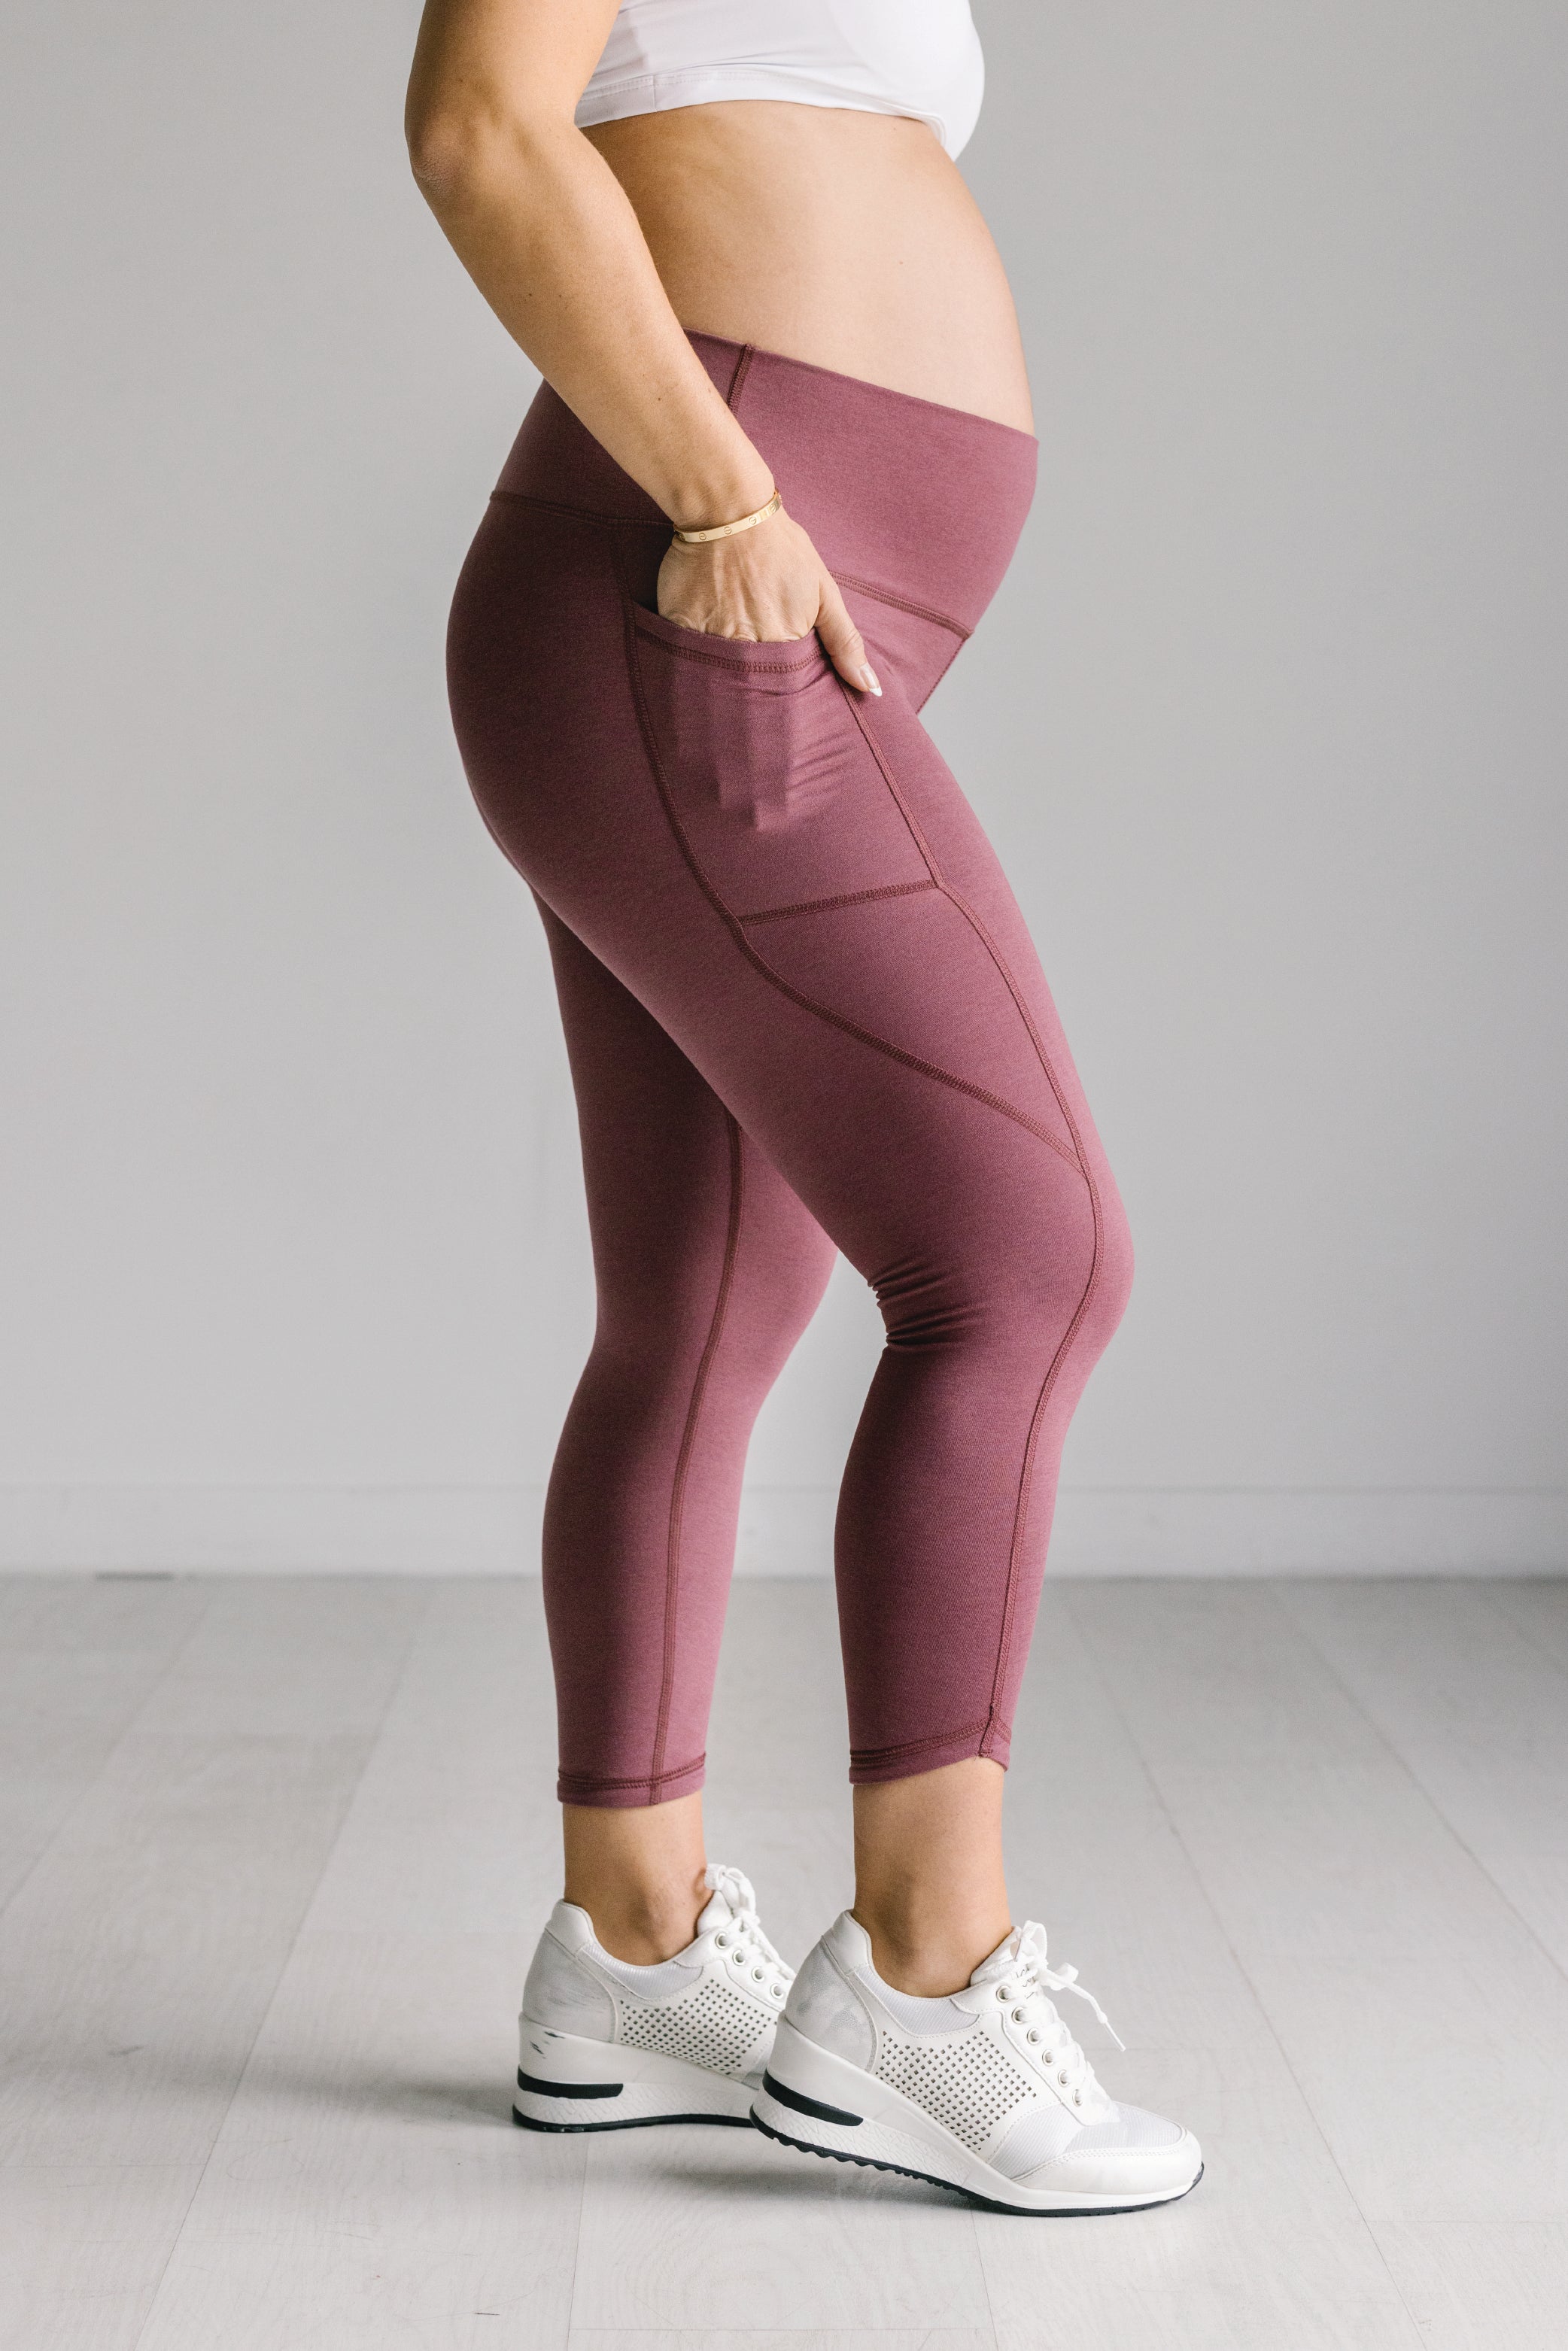 Maternity Jogger Pants for Active and Comfort-Seeking Moms – Anook